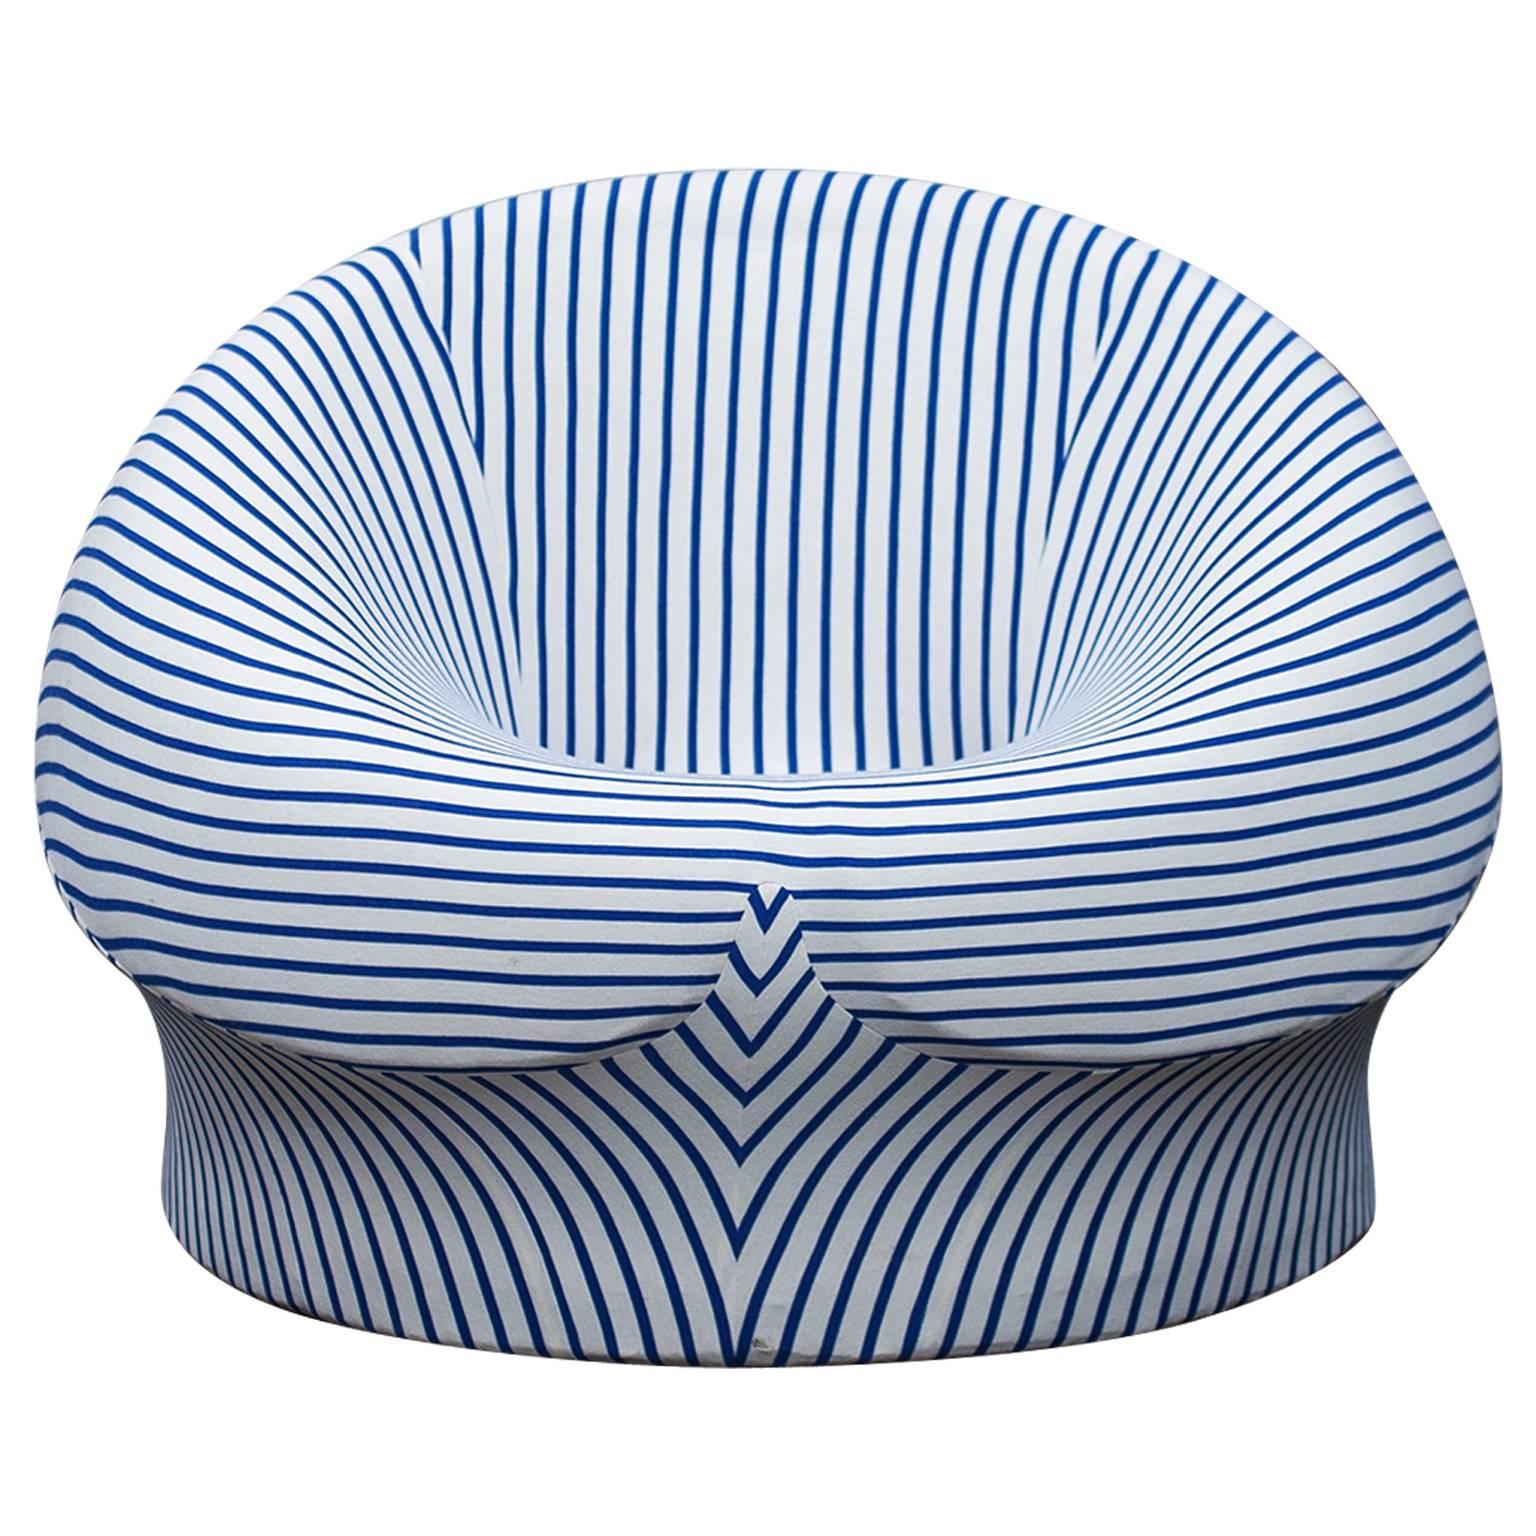 UP3 Chair by Gaetano Pesce in Jean Paul Gaultier Fabric